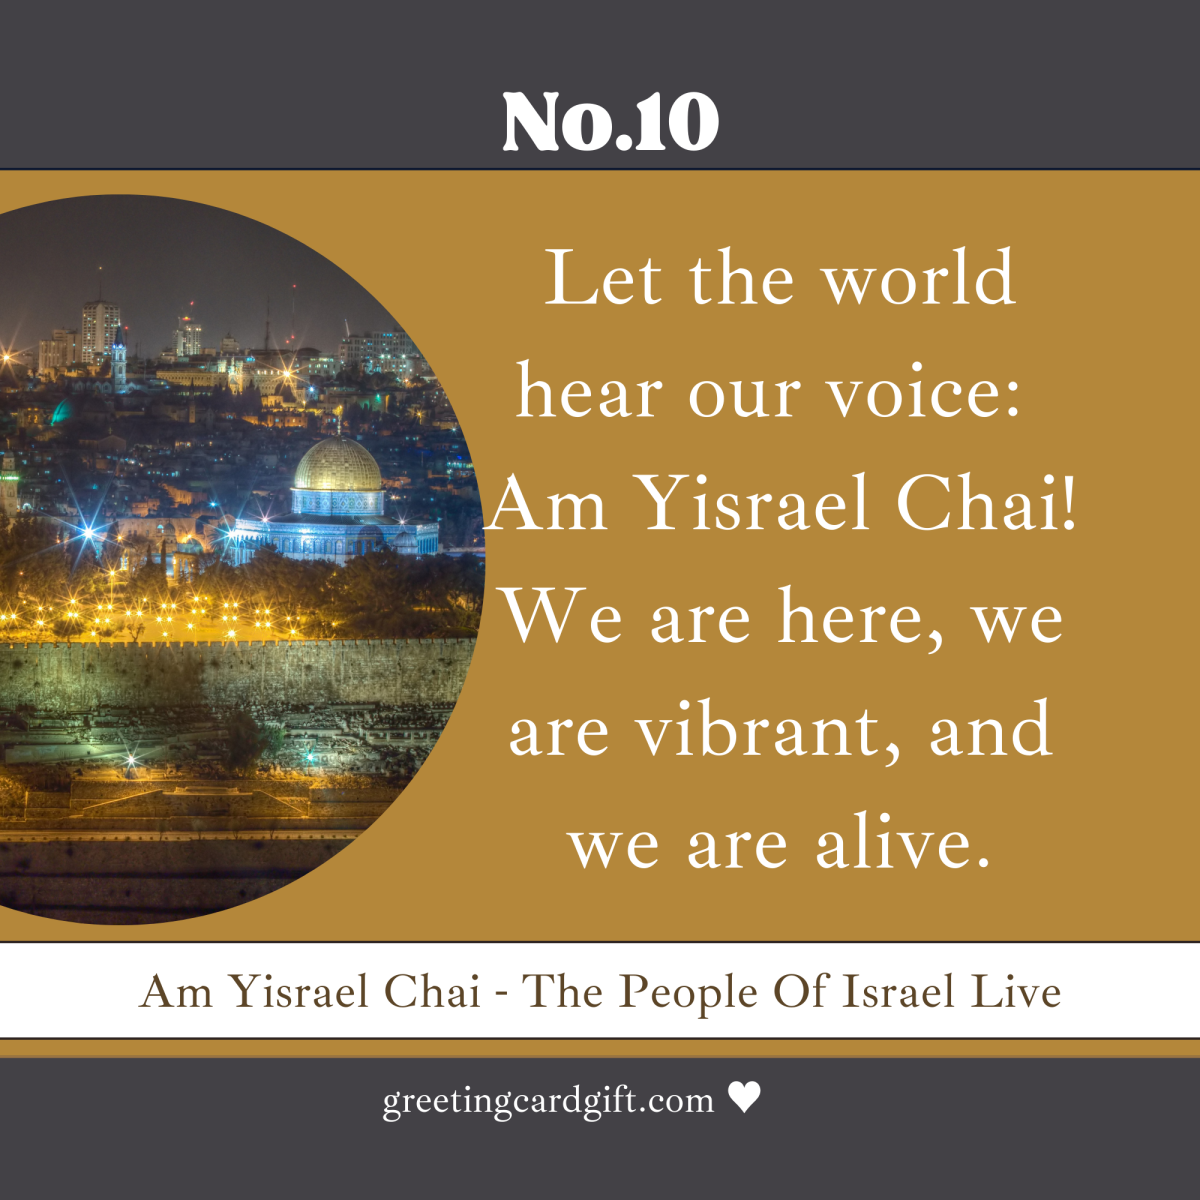 Am Yisrael Chai – The People Of Israel Live – No.10